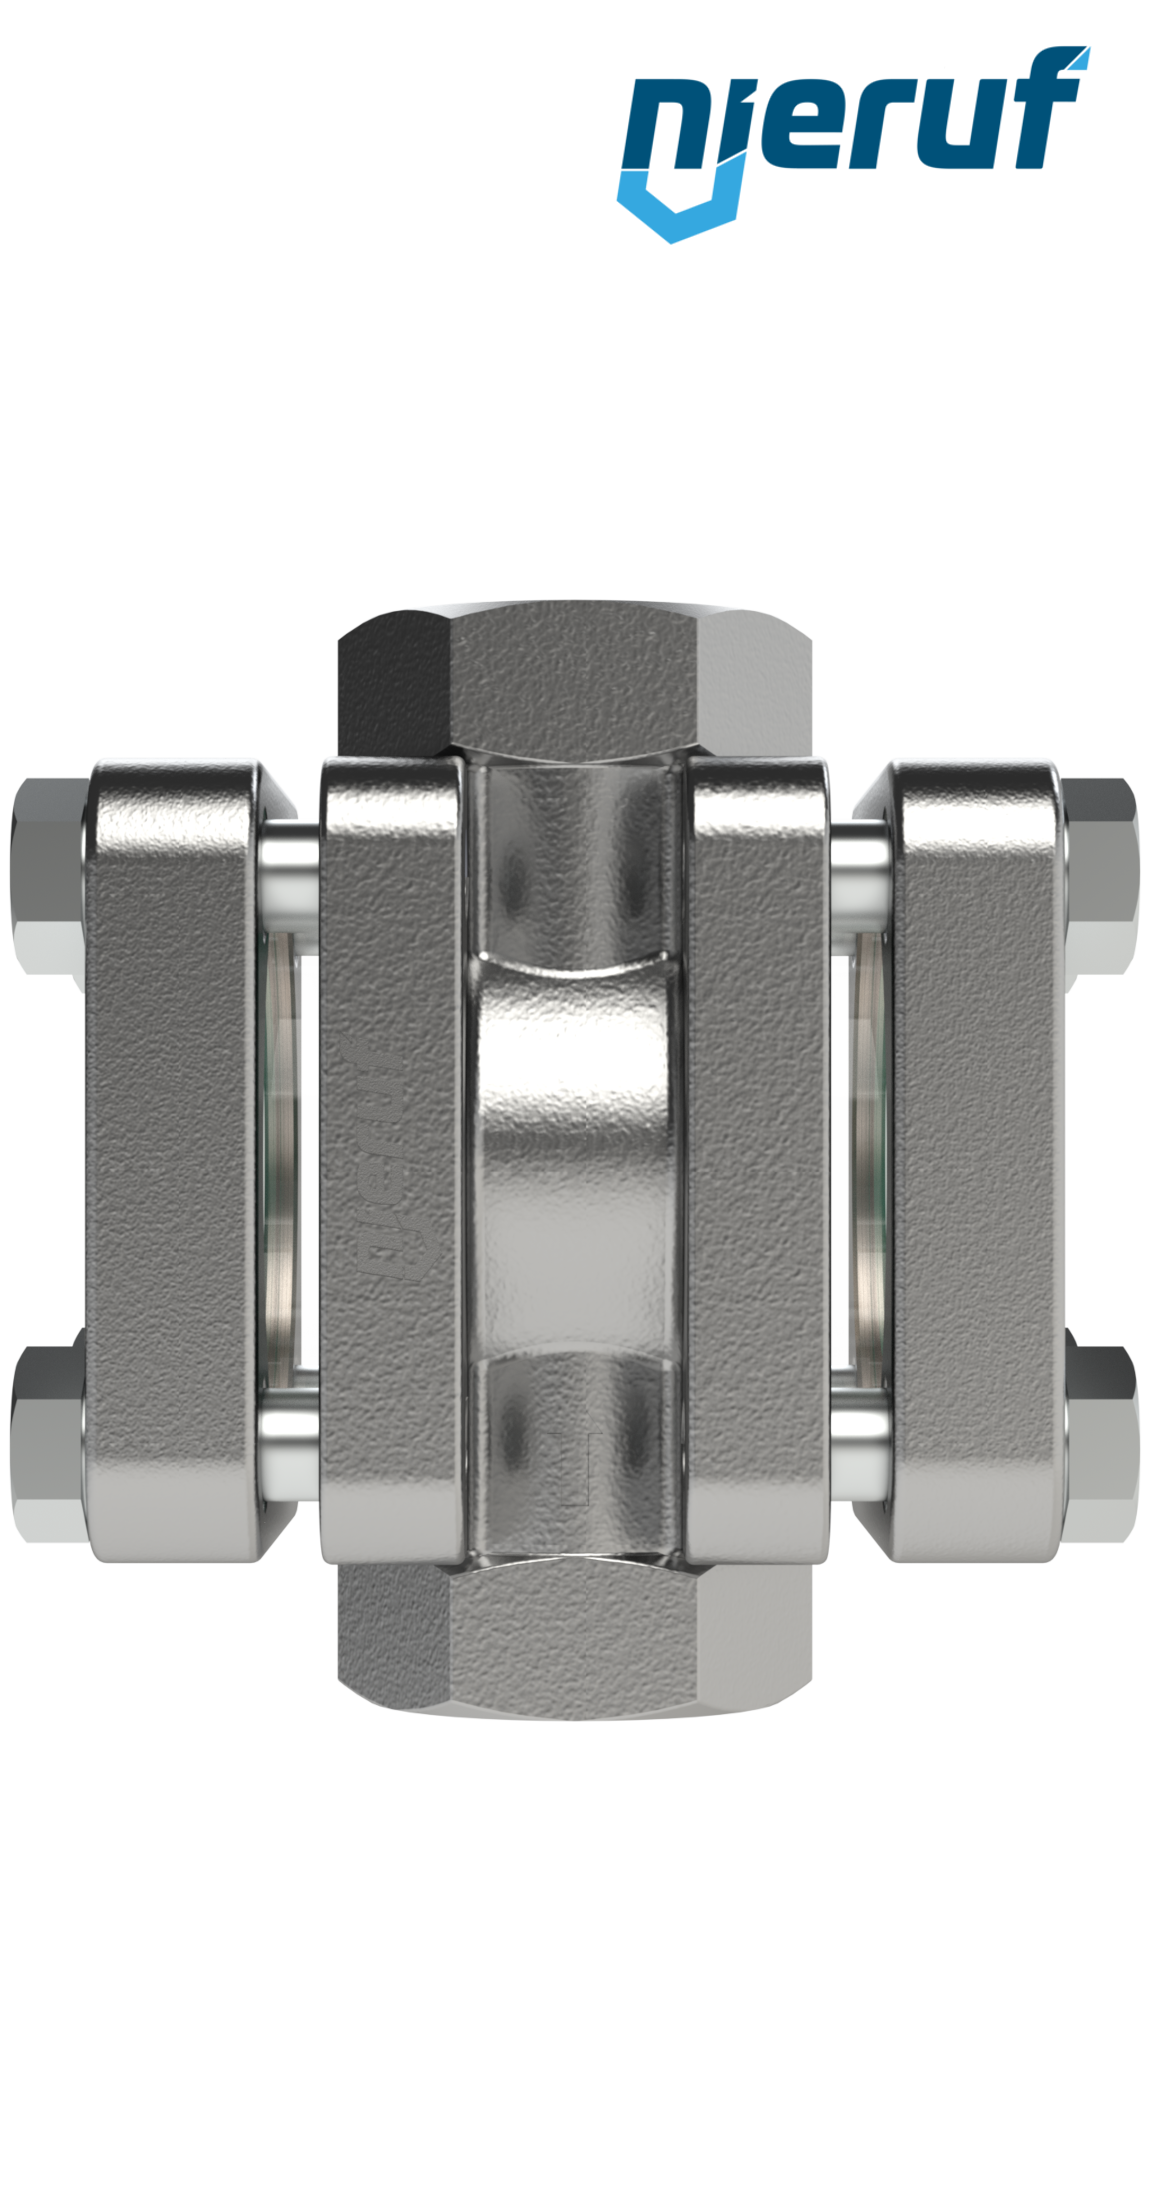 flow-through sight flow indicator DN15 - 1/2" Inch stainless steel borosilicate glass design with disc